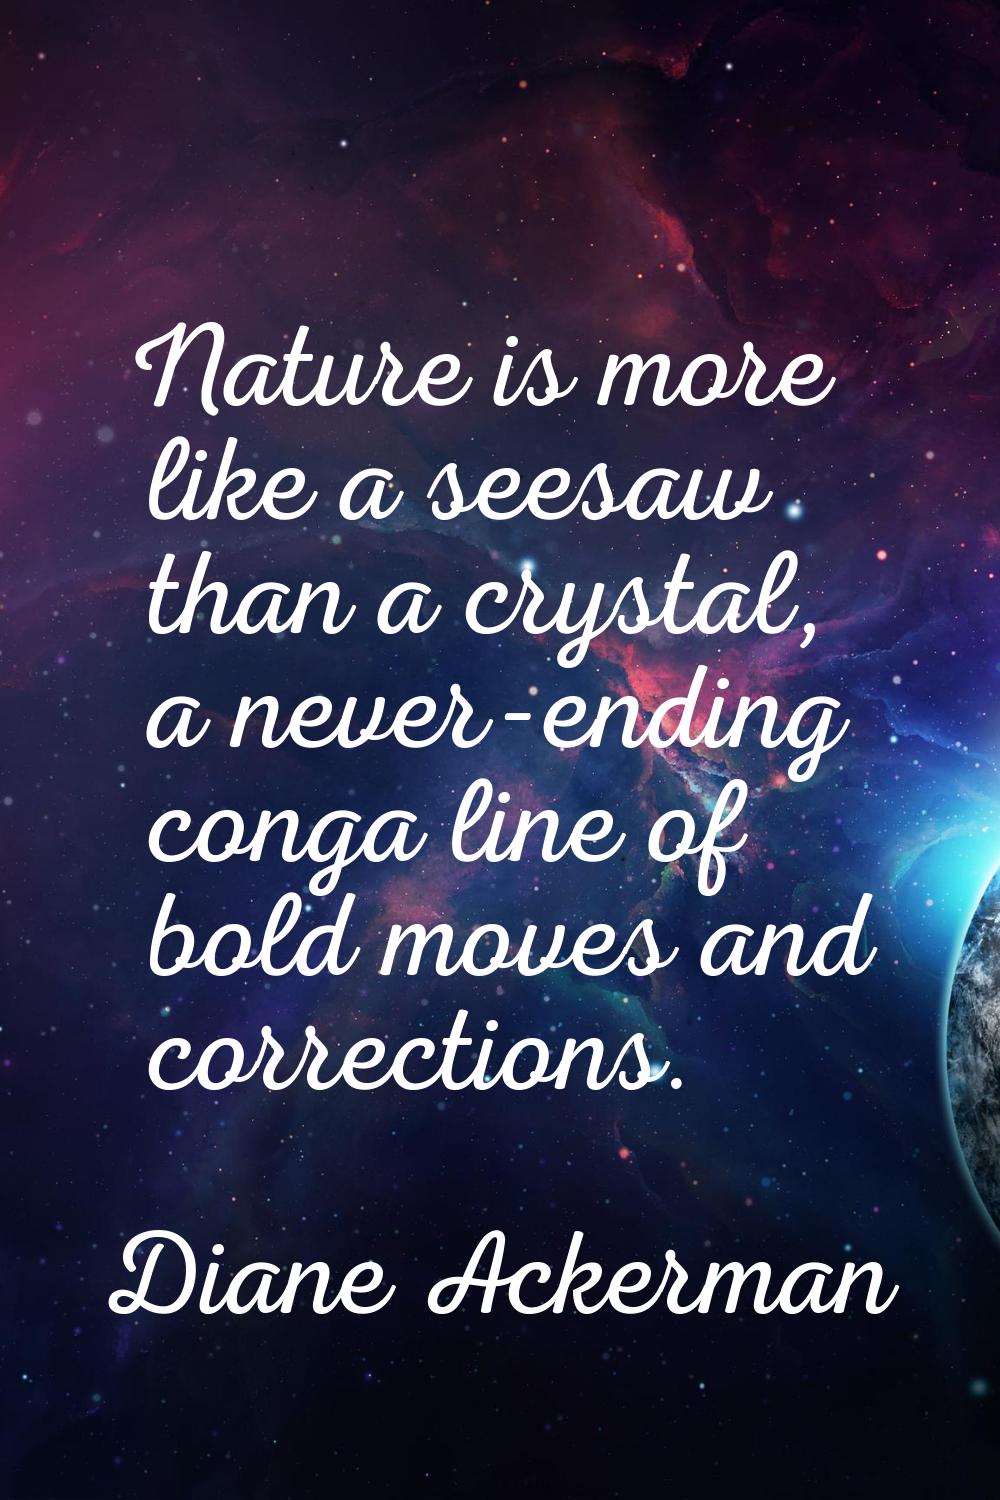 Nature is more like a seesaw than a crystal, a never-ending conga line of bold moves and correction